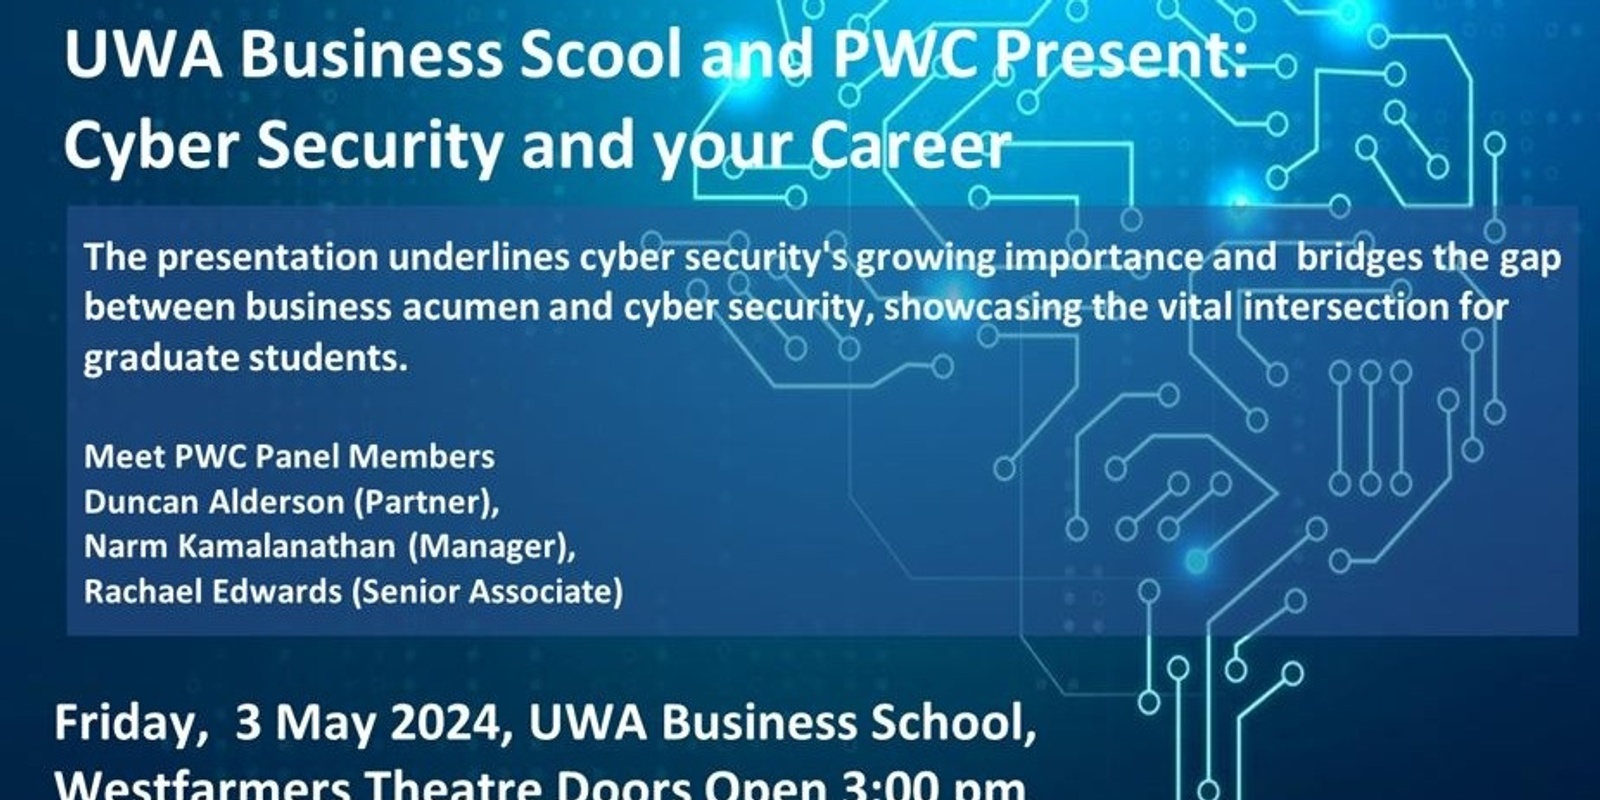 Banner image for Cyber Security and your Business Career